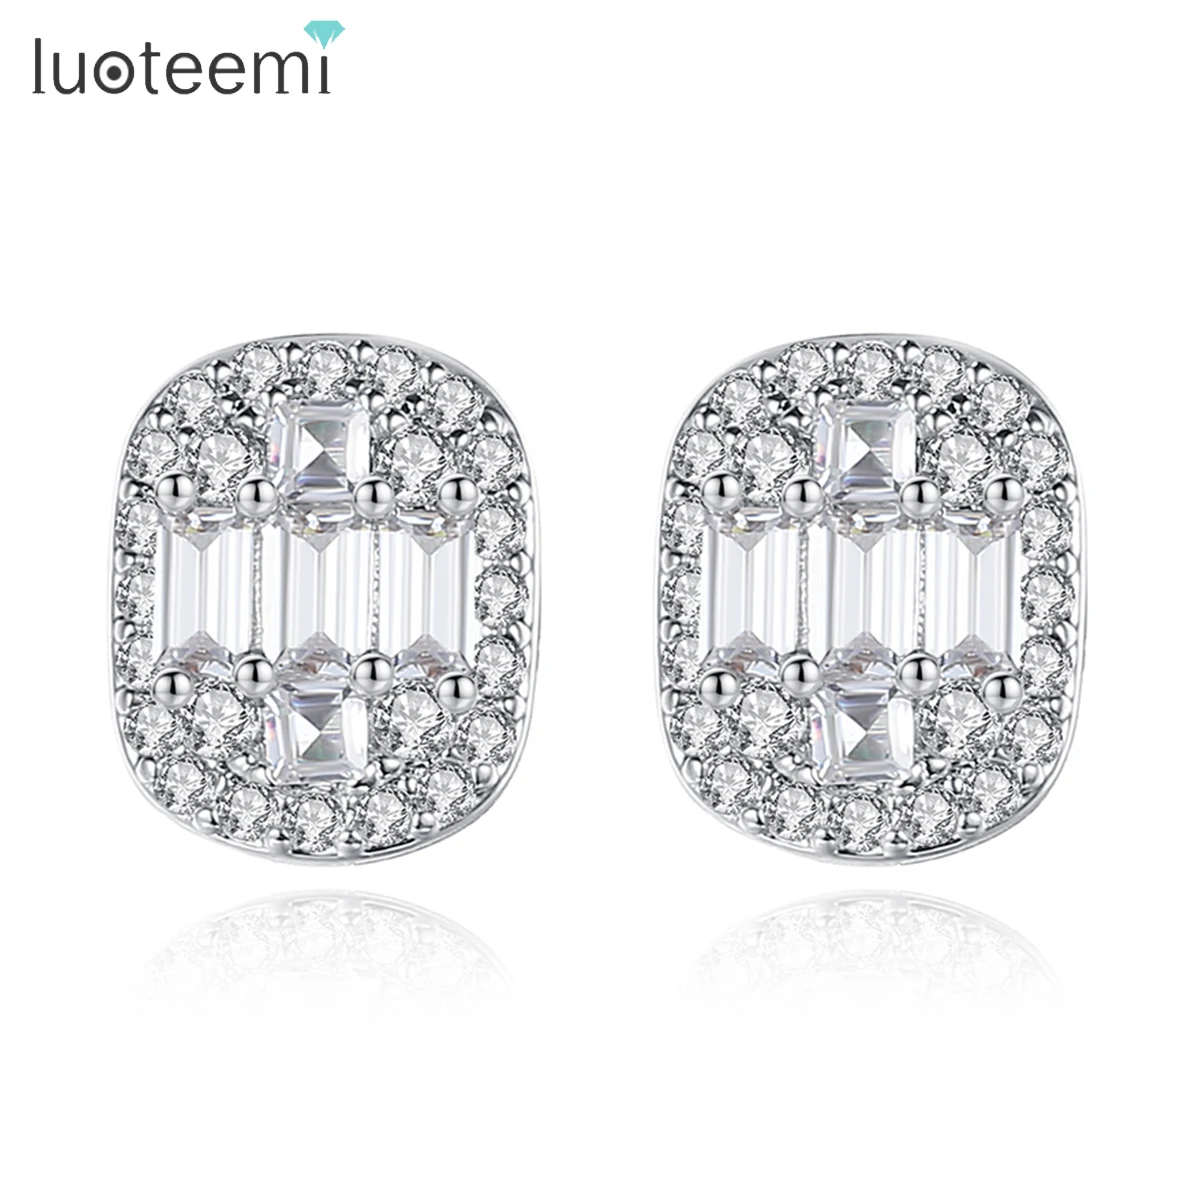 LUOTEEMI Square Korean Fashion Style CZ Stud Earring for Women Simple Design Wedding Bridal Girl Daily Wearing Friend Gift